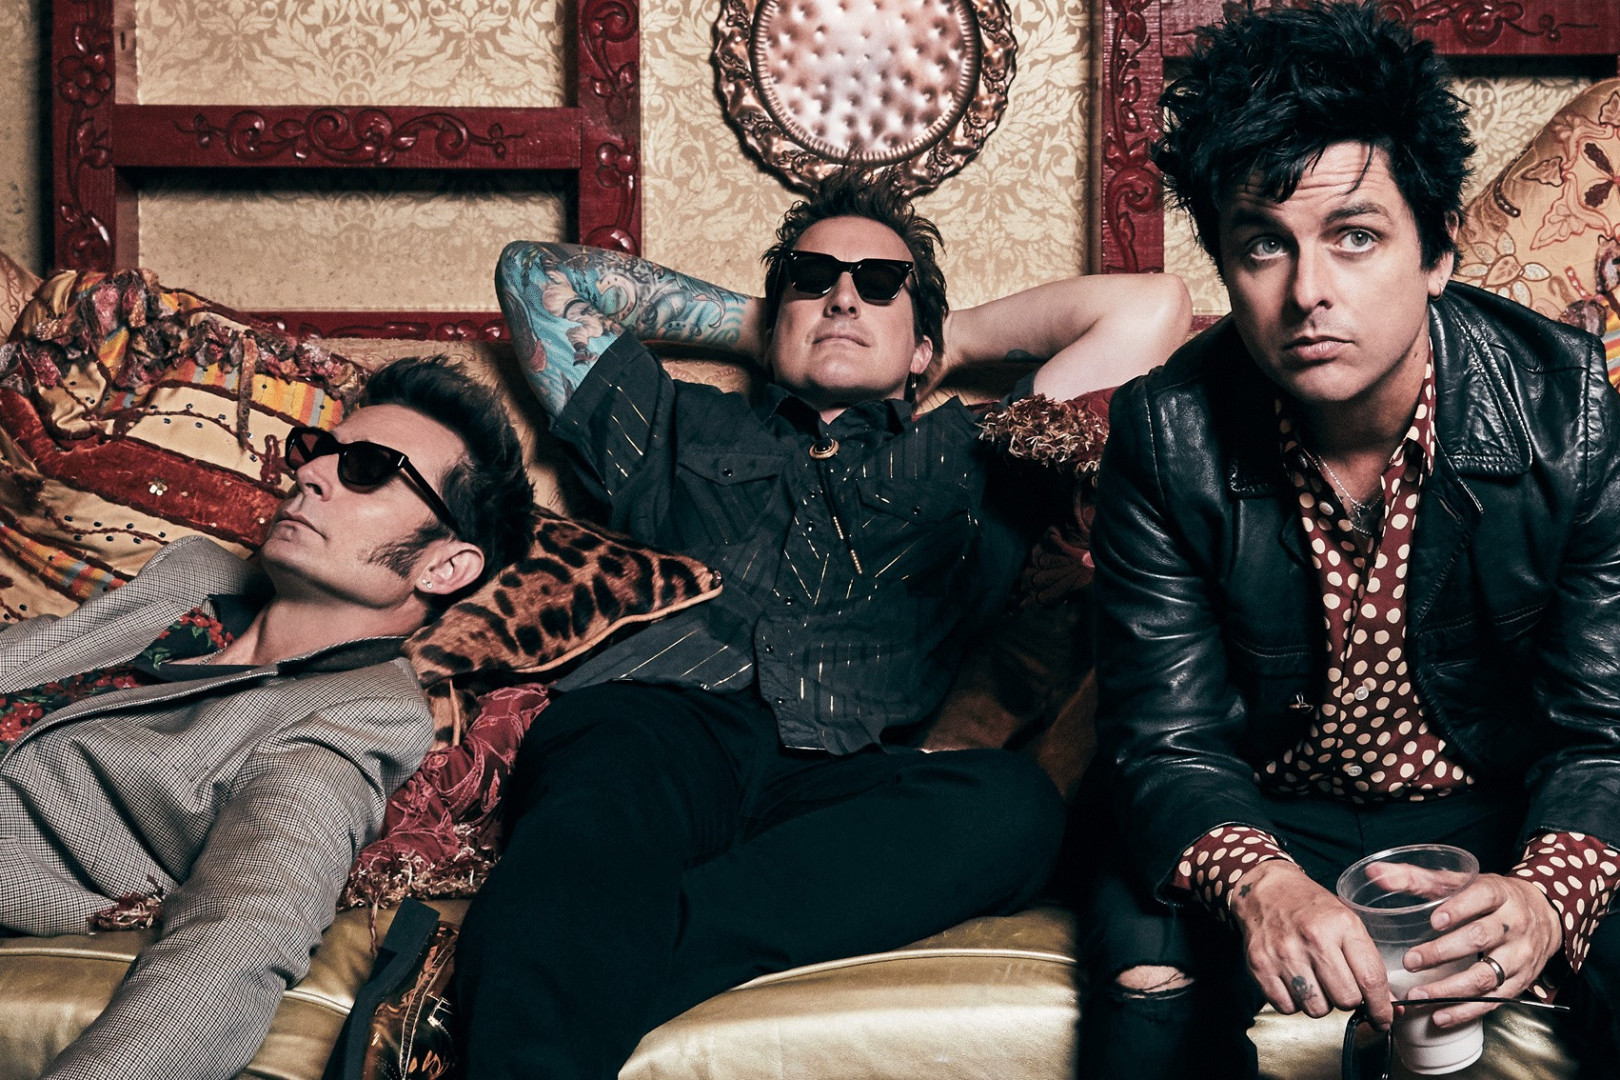 Green Day played a set in a subway with Jimmy Fallon